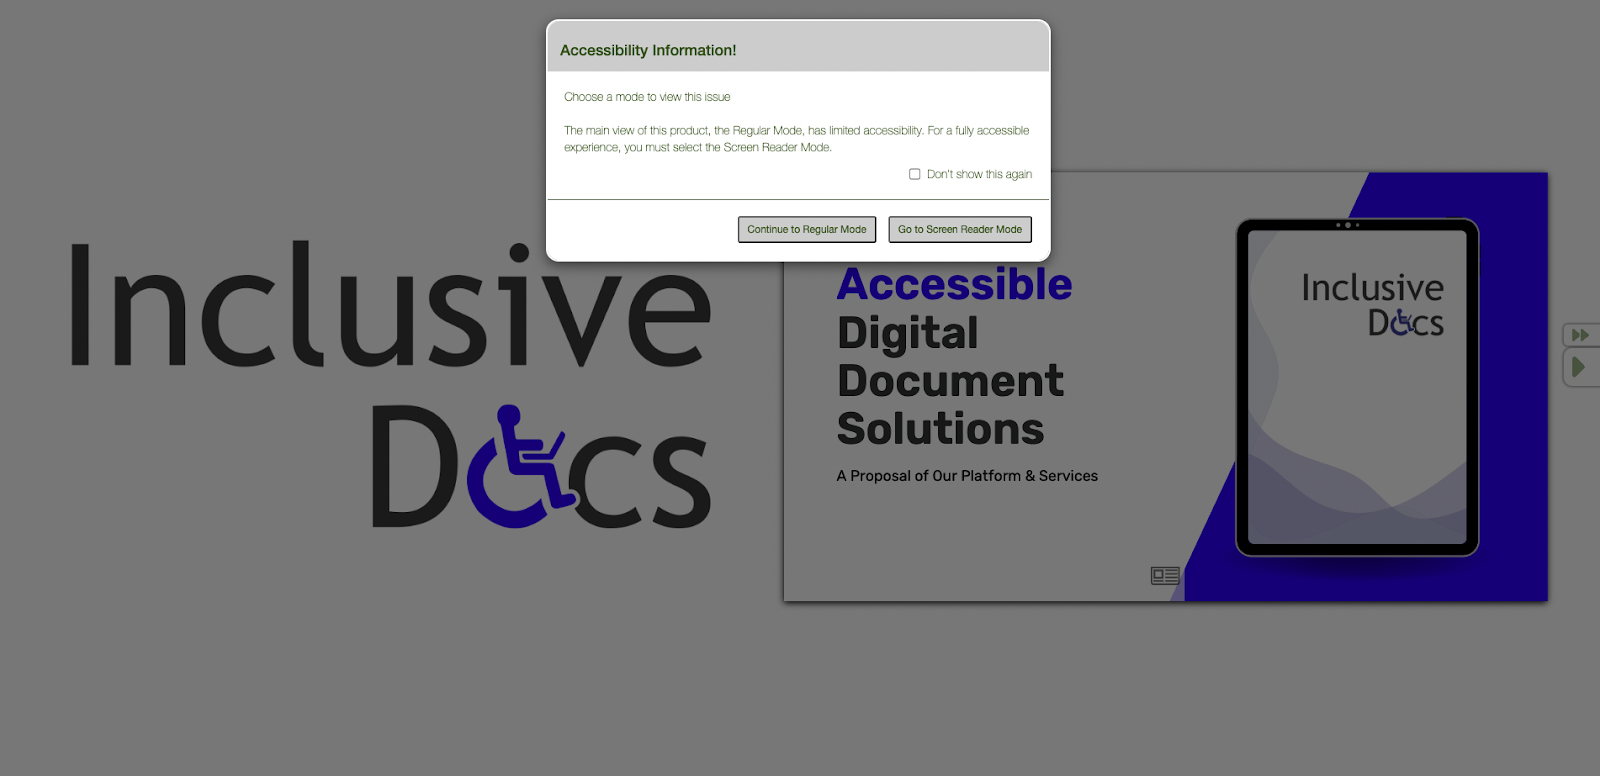 The image depicts a screen with the InclusiveDocs logo and a template displayed on a device. A pop-up window appears on the screen, providing accessibility information to the user. The user can choose between two modes to view the content - regular mode or screen reader mode. Additionally, there is an option to check the popup so that it doesn't appear the next time the user chooses a mode.